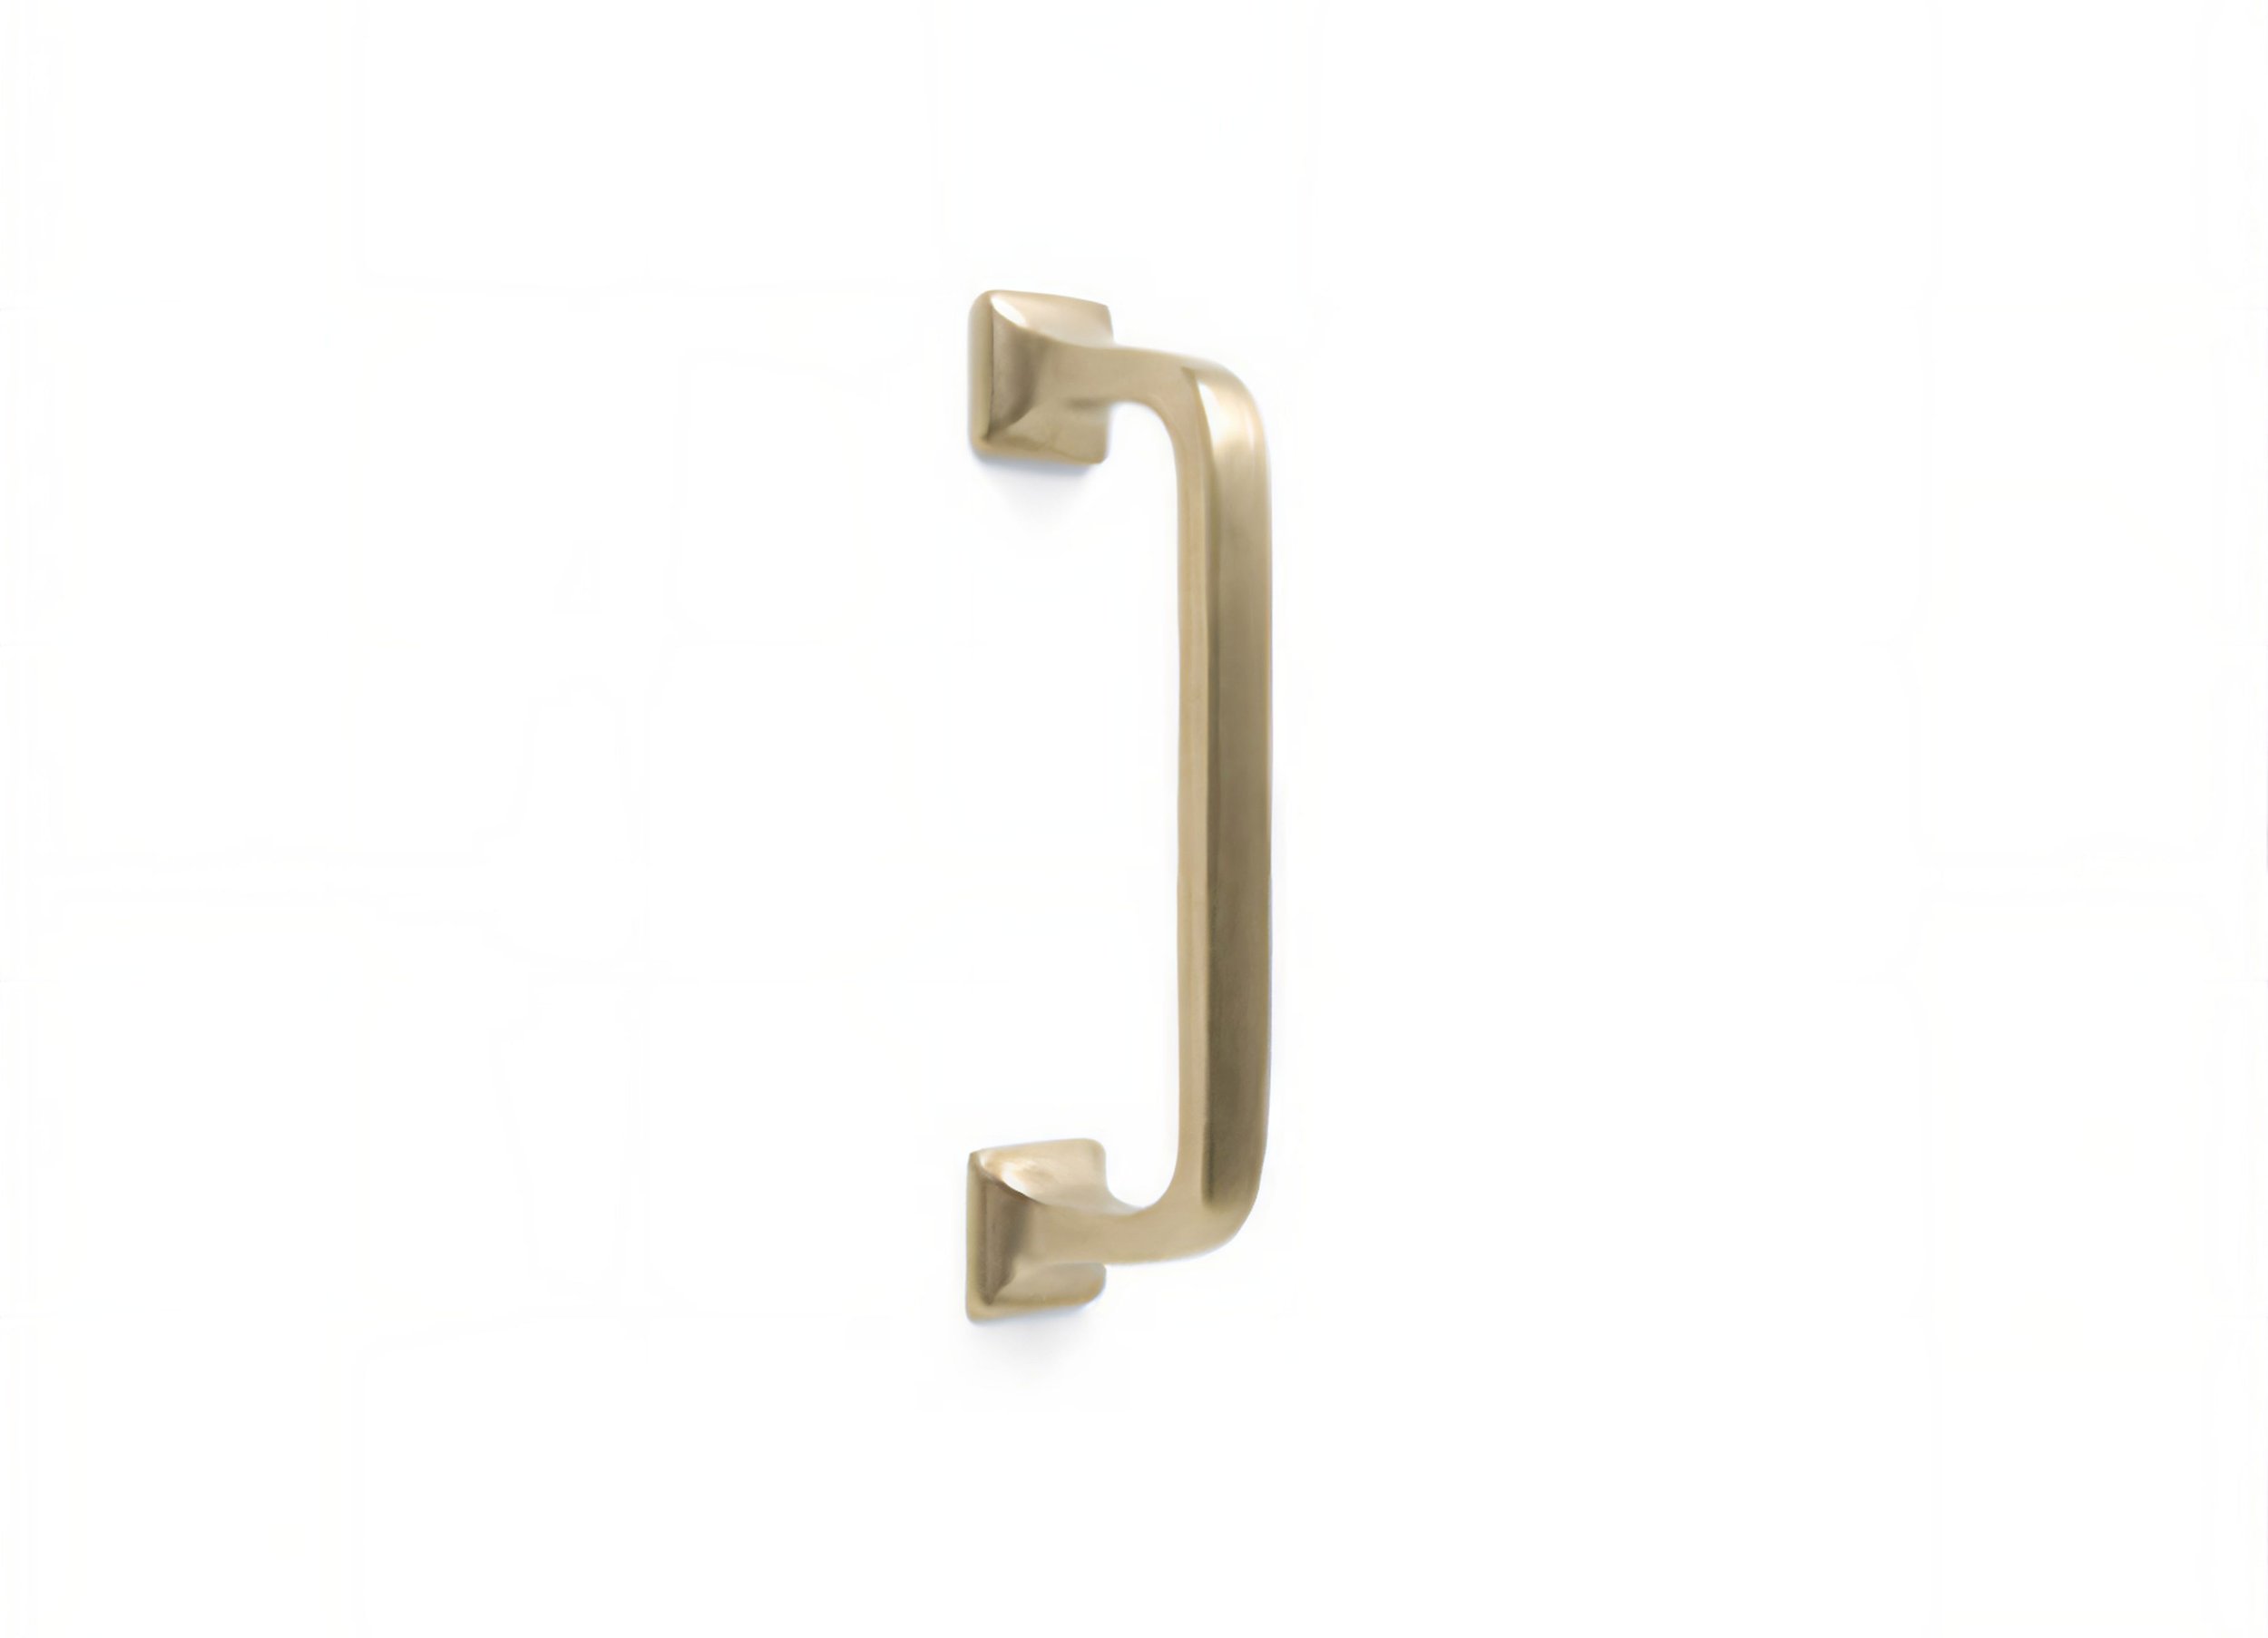 CK-534 Square Handle Cabinet Pull